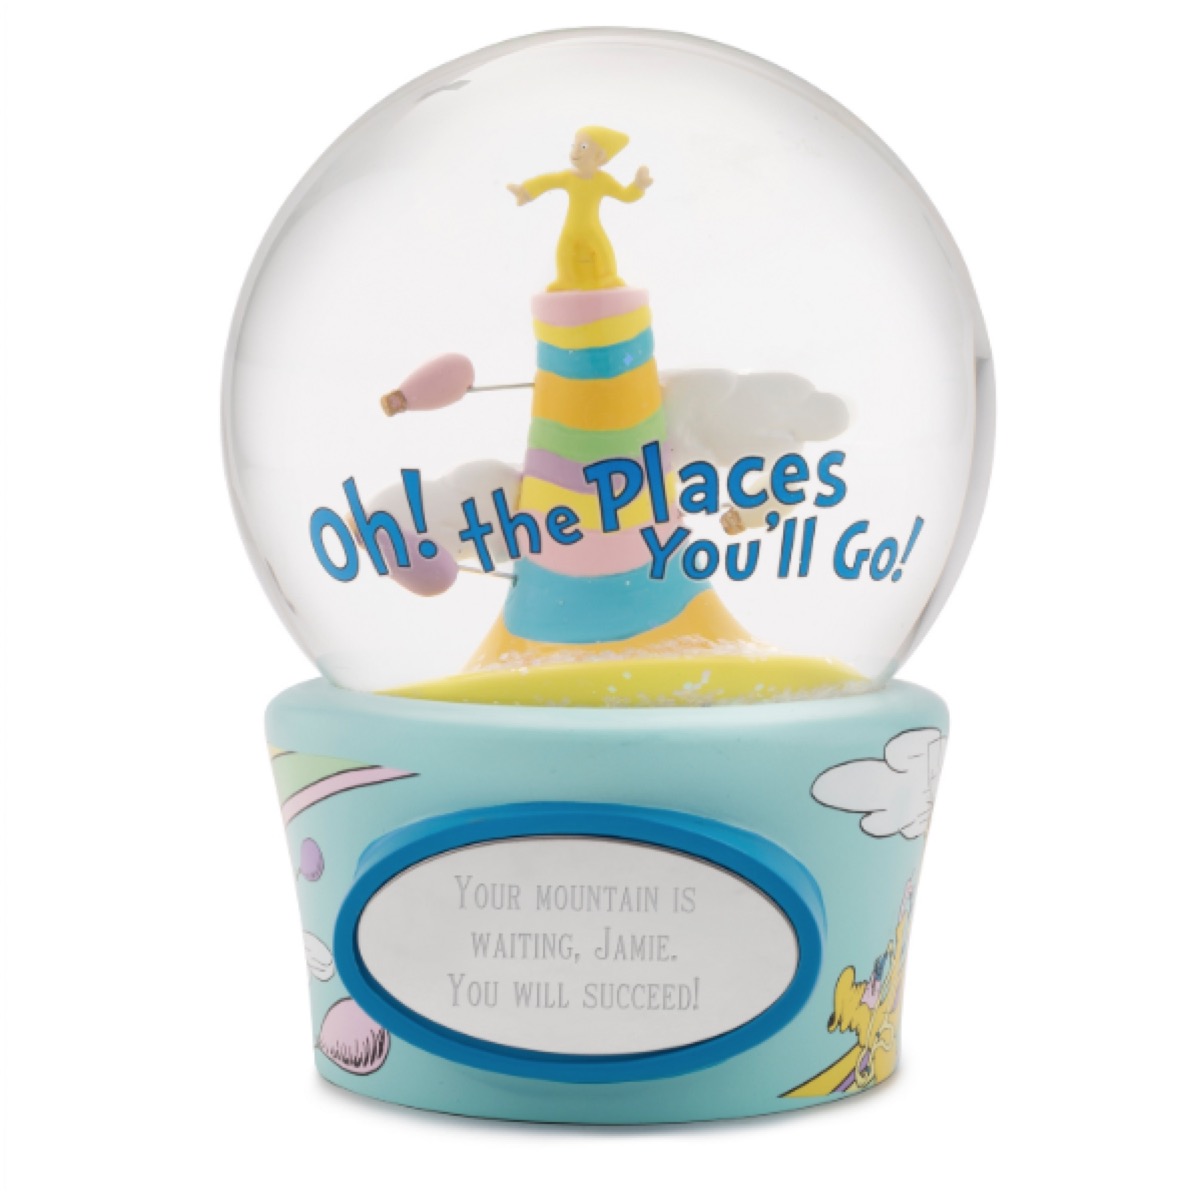 oh the places you'll go snowglobe on blue base